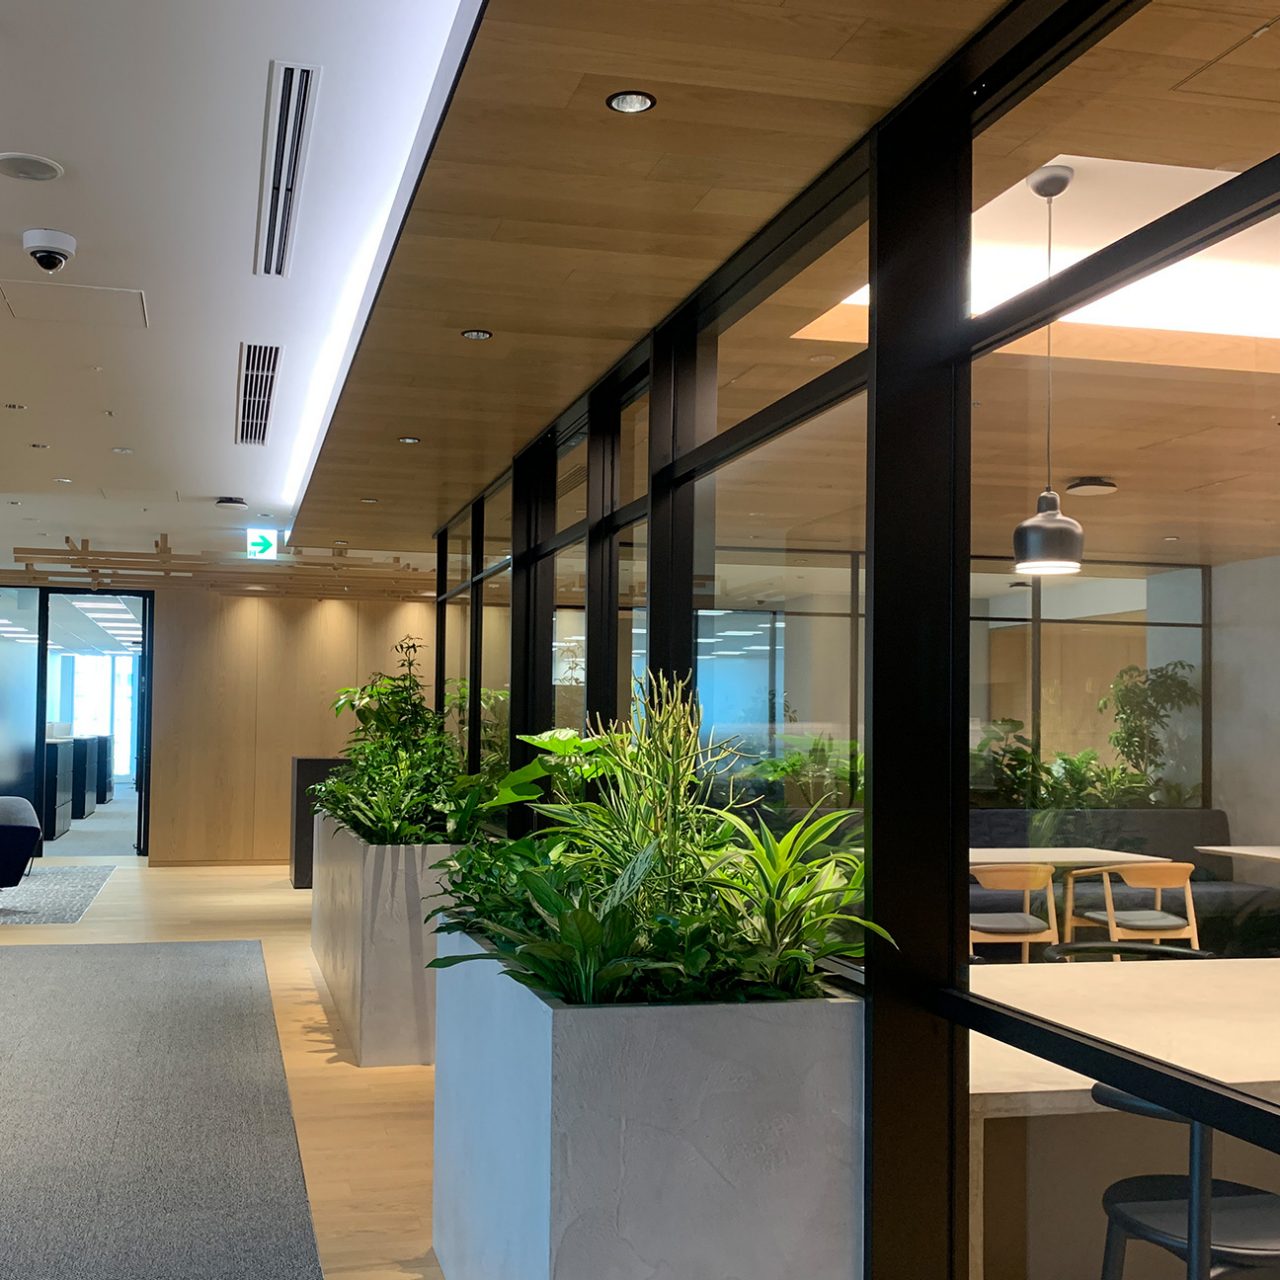 Corporate office with office plants in the foreground